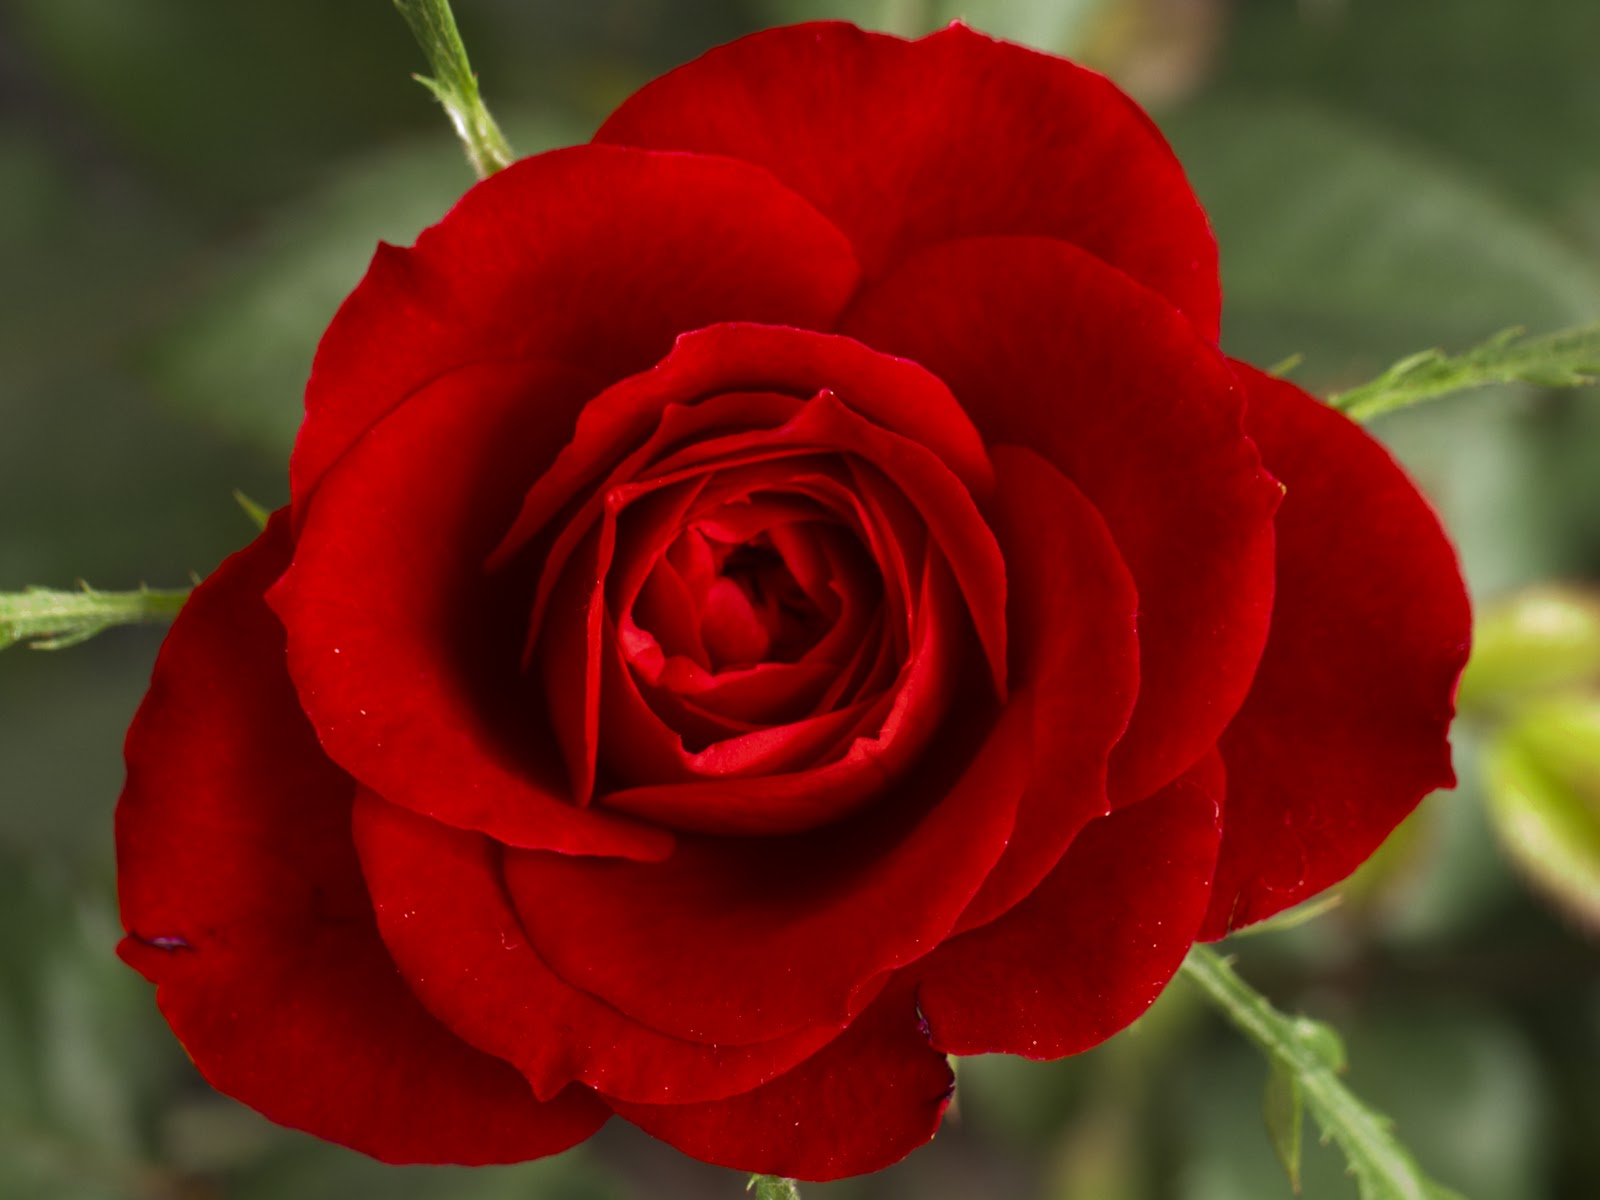  pictures beautiful red rose flowers pictures beautiful red rose